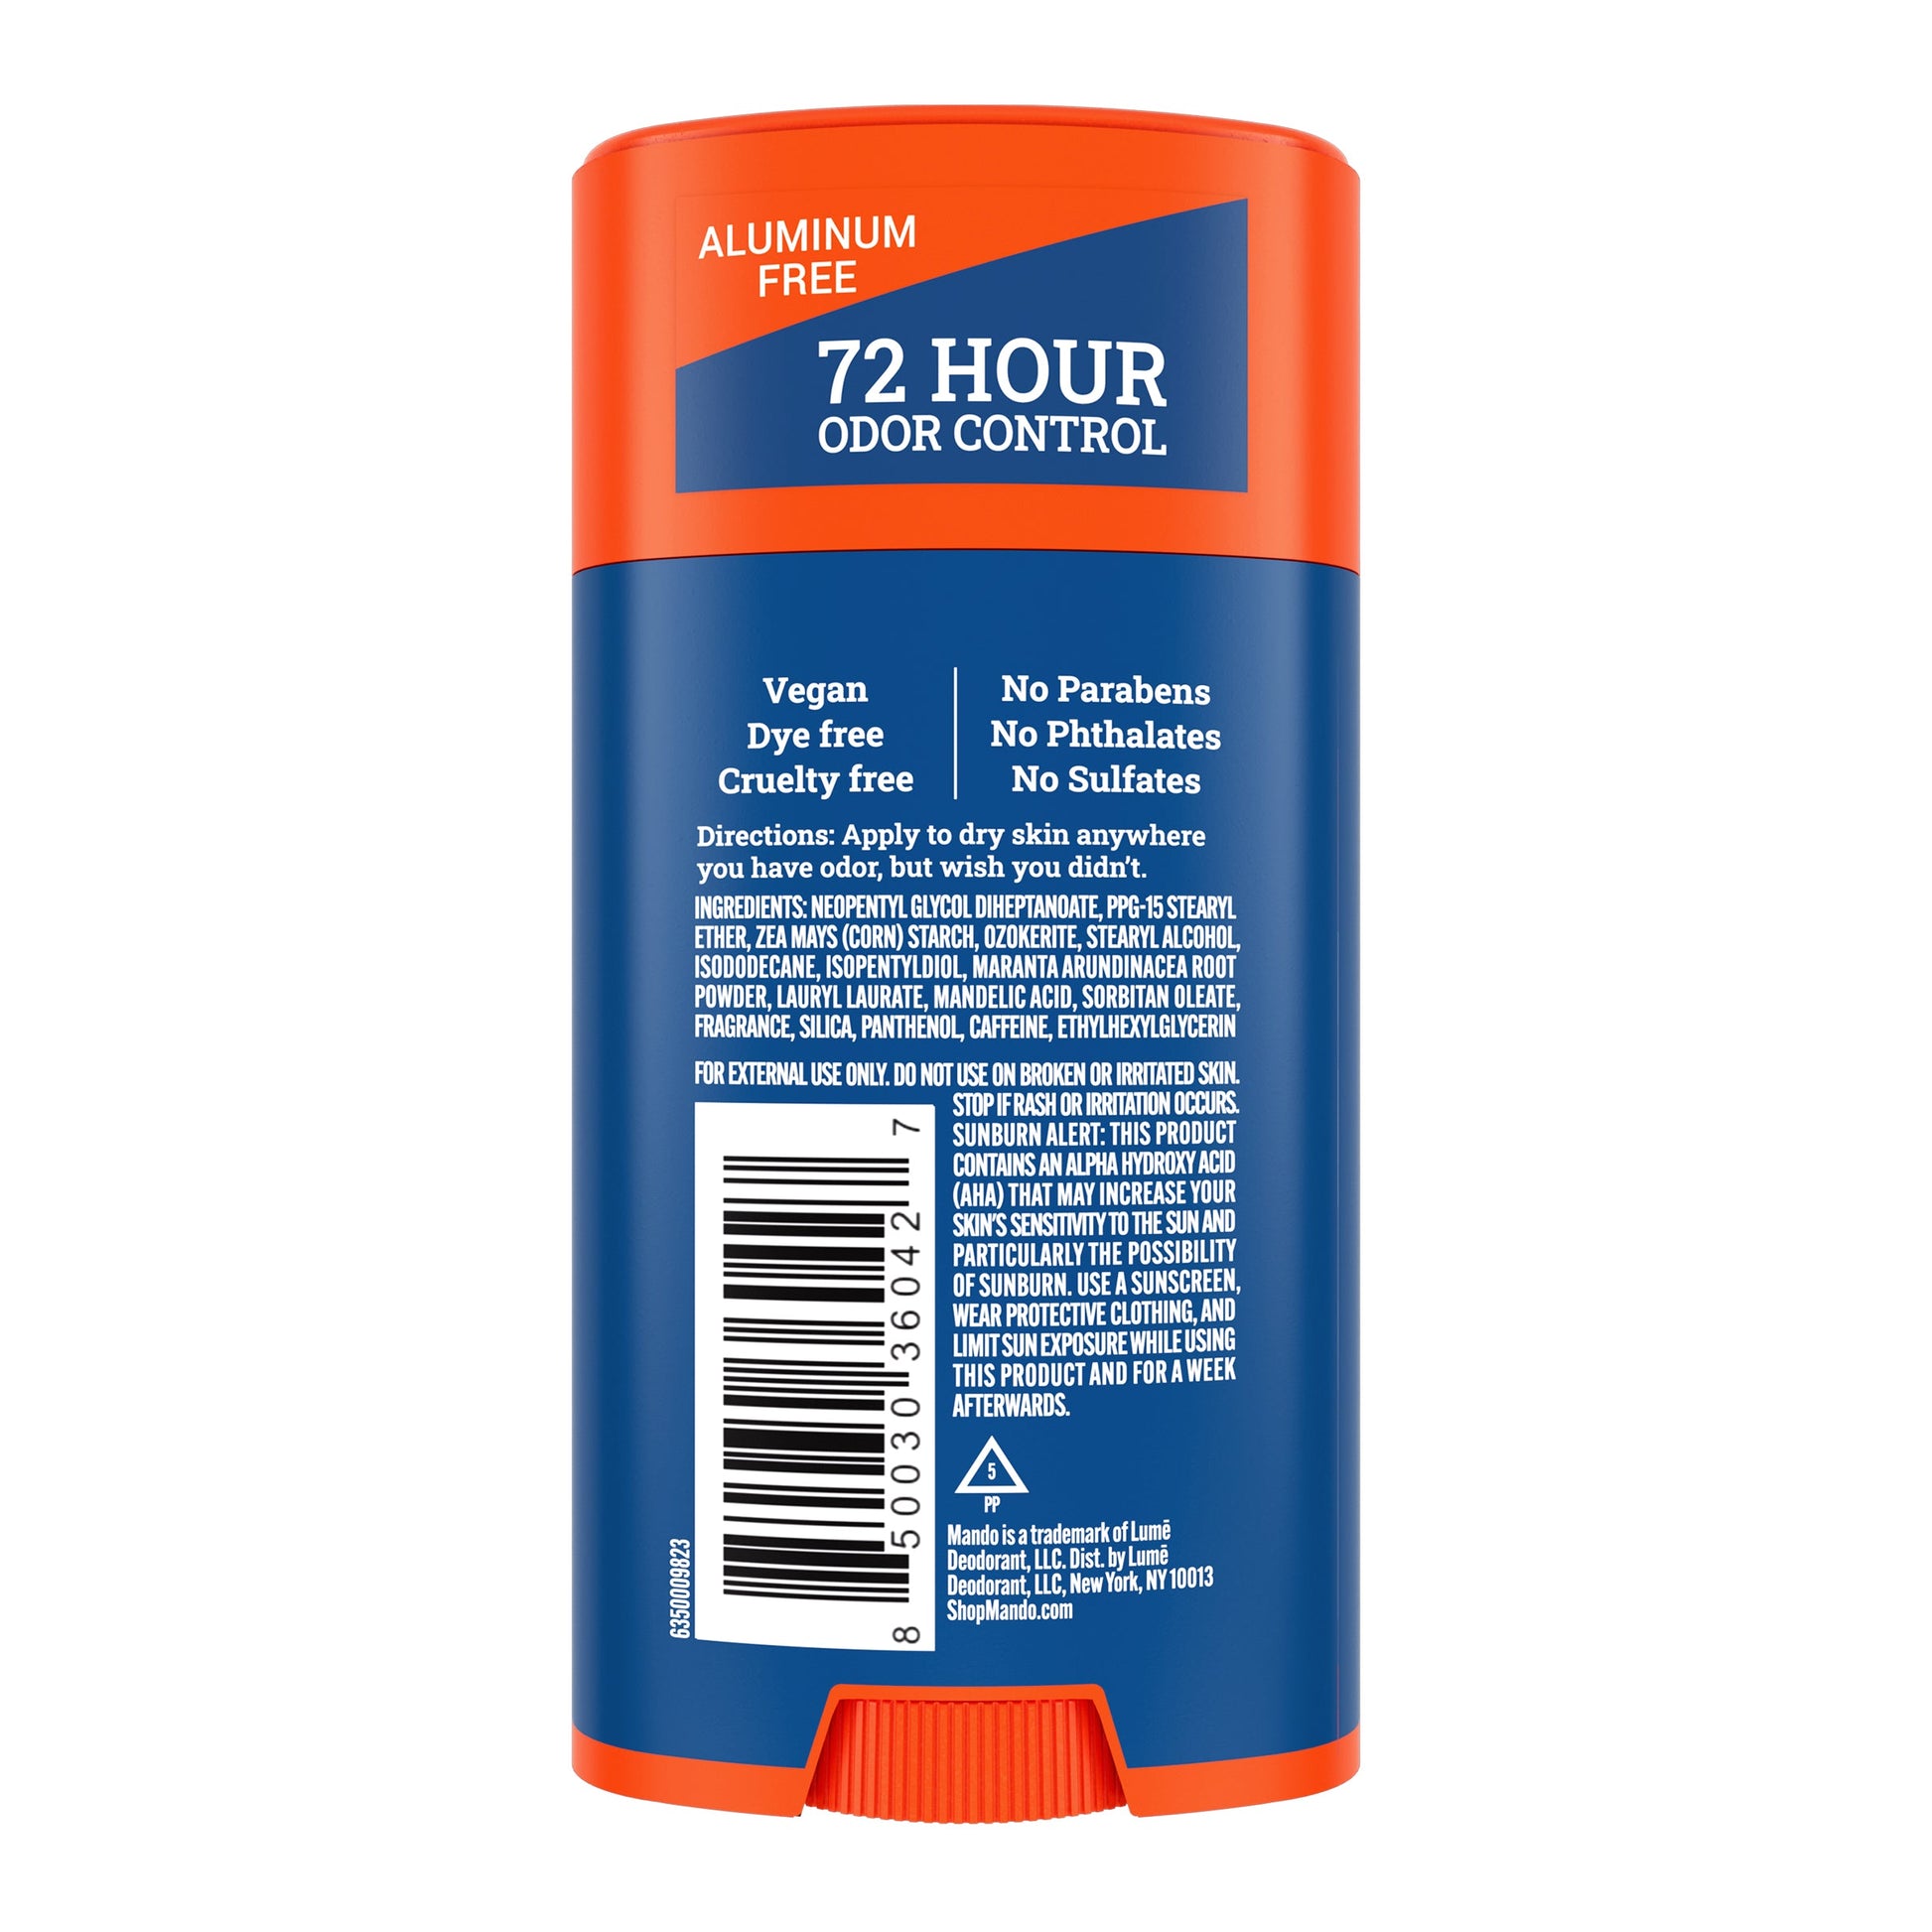 back image of pro sport smooth solid deodorant stick with ingredients list and text: aluminum free, 72 hour odor control